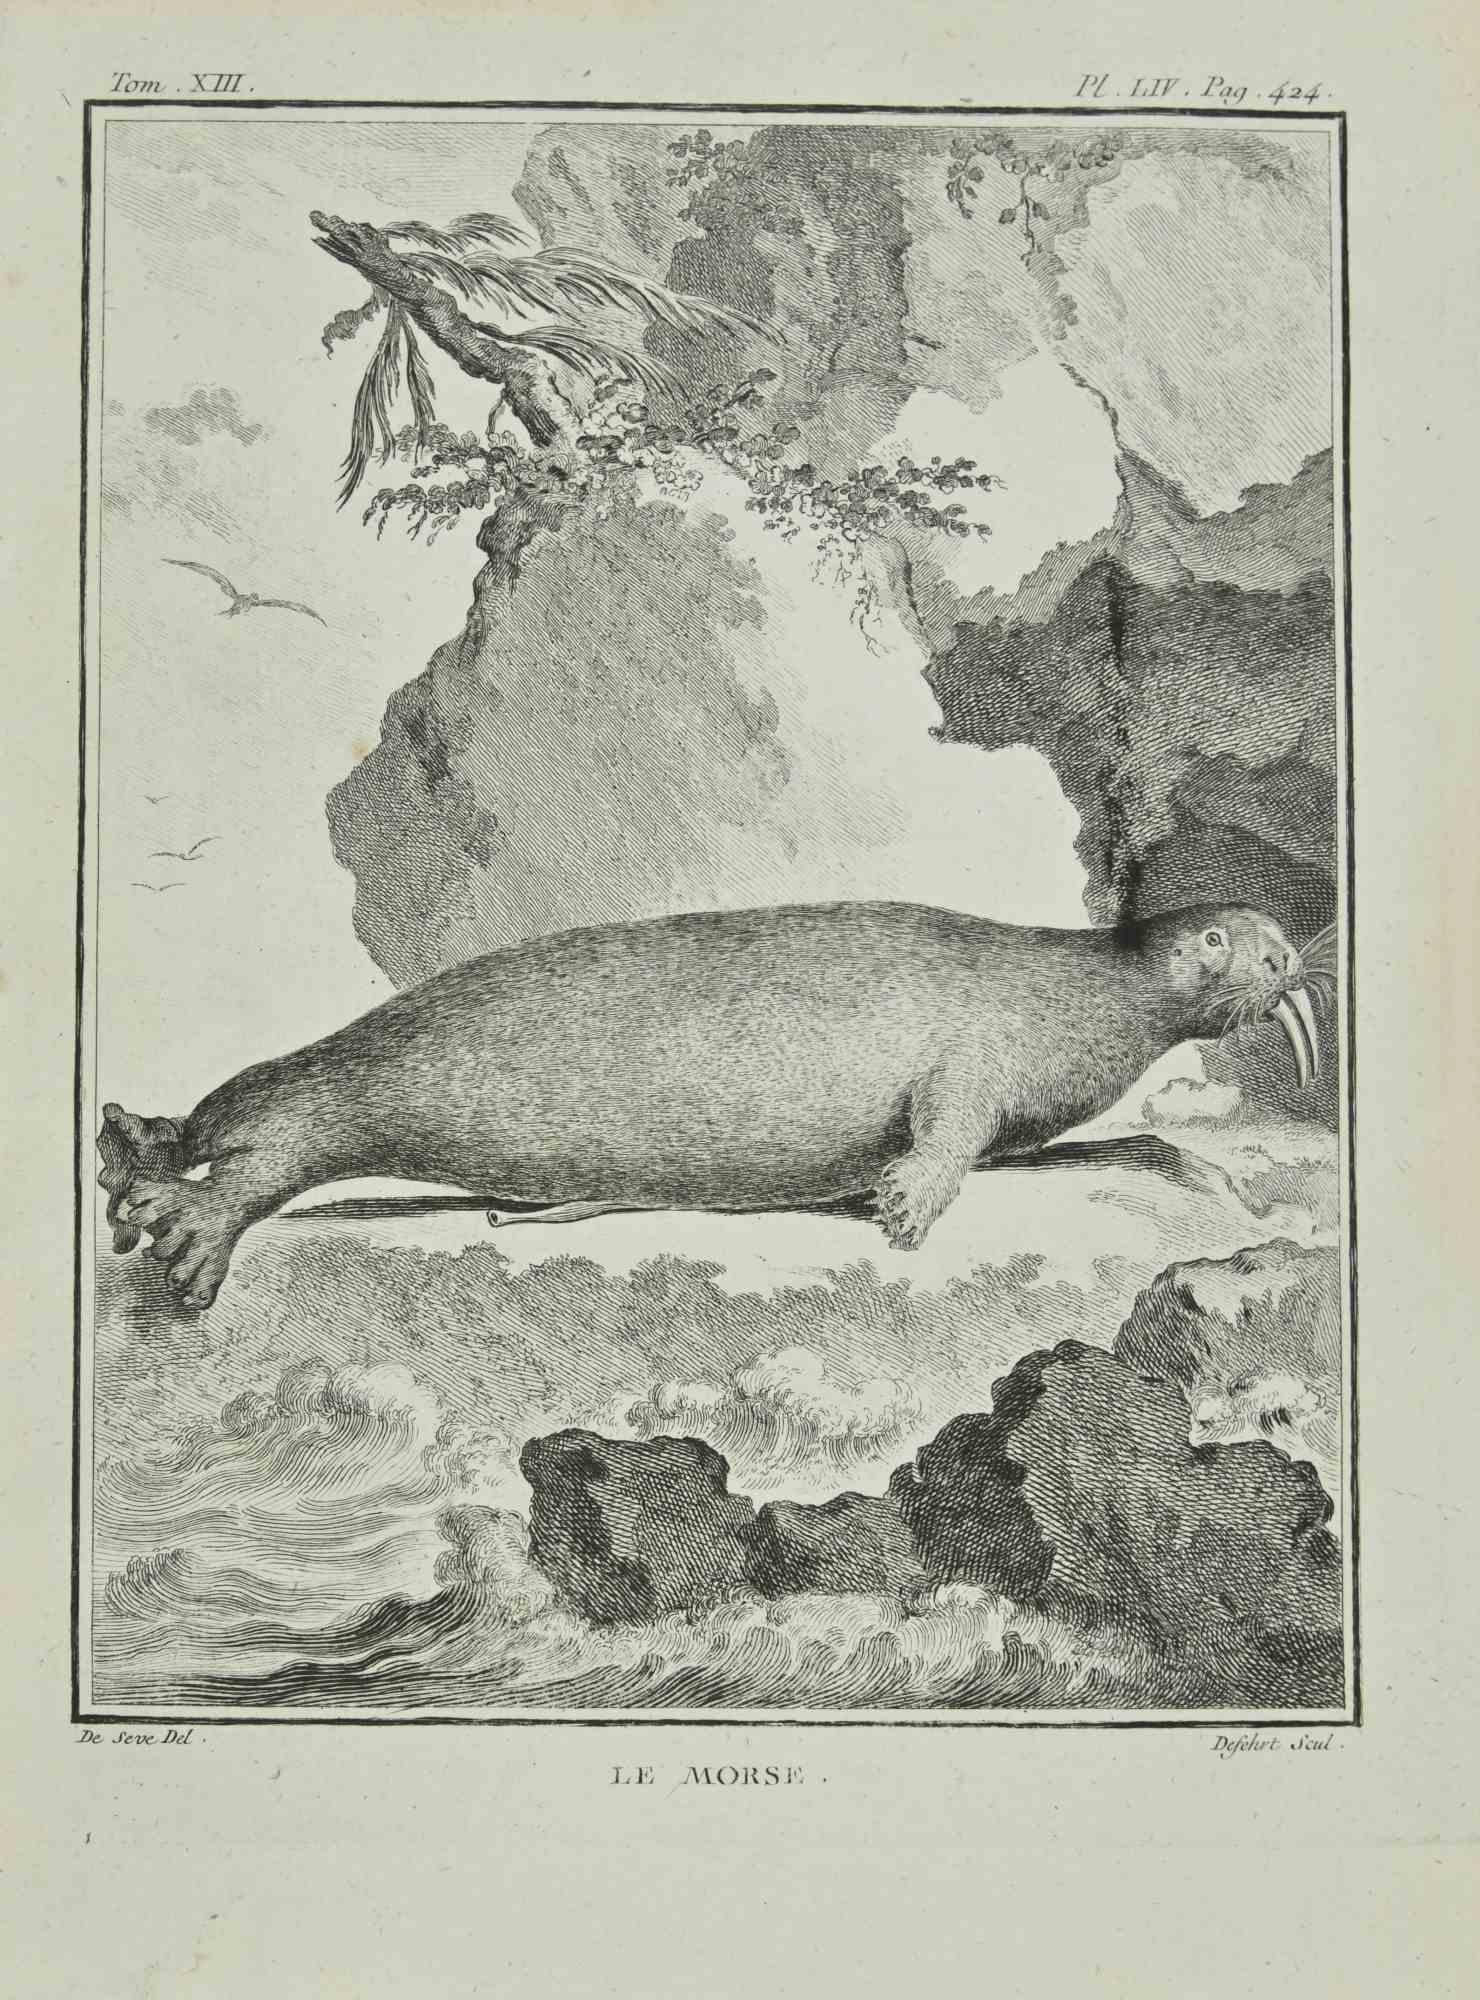 Le Morse is an etching realized by A. Defehrt in 1771.

It belongs to the suite "Histoire Naturelle de Buffon".

The Artist's signature is engraved lower right.

Good conditions
